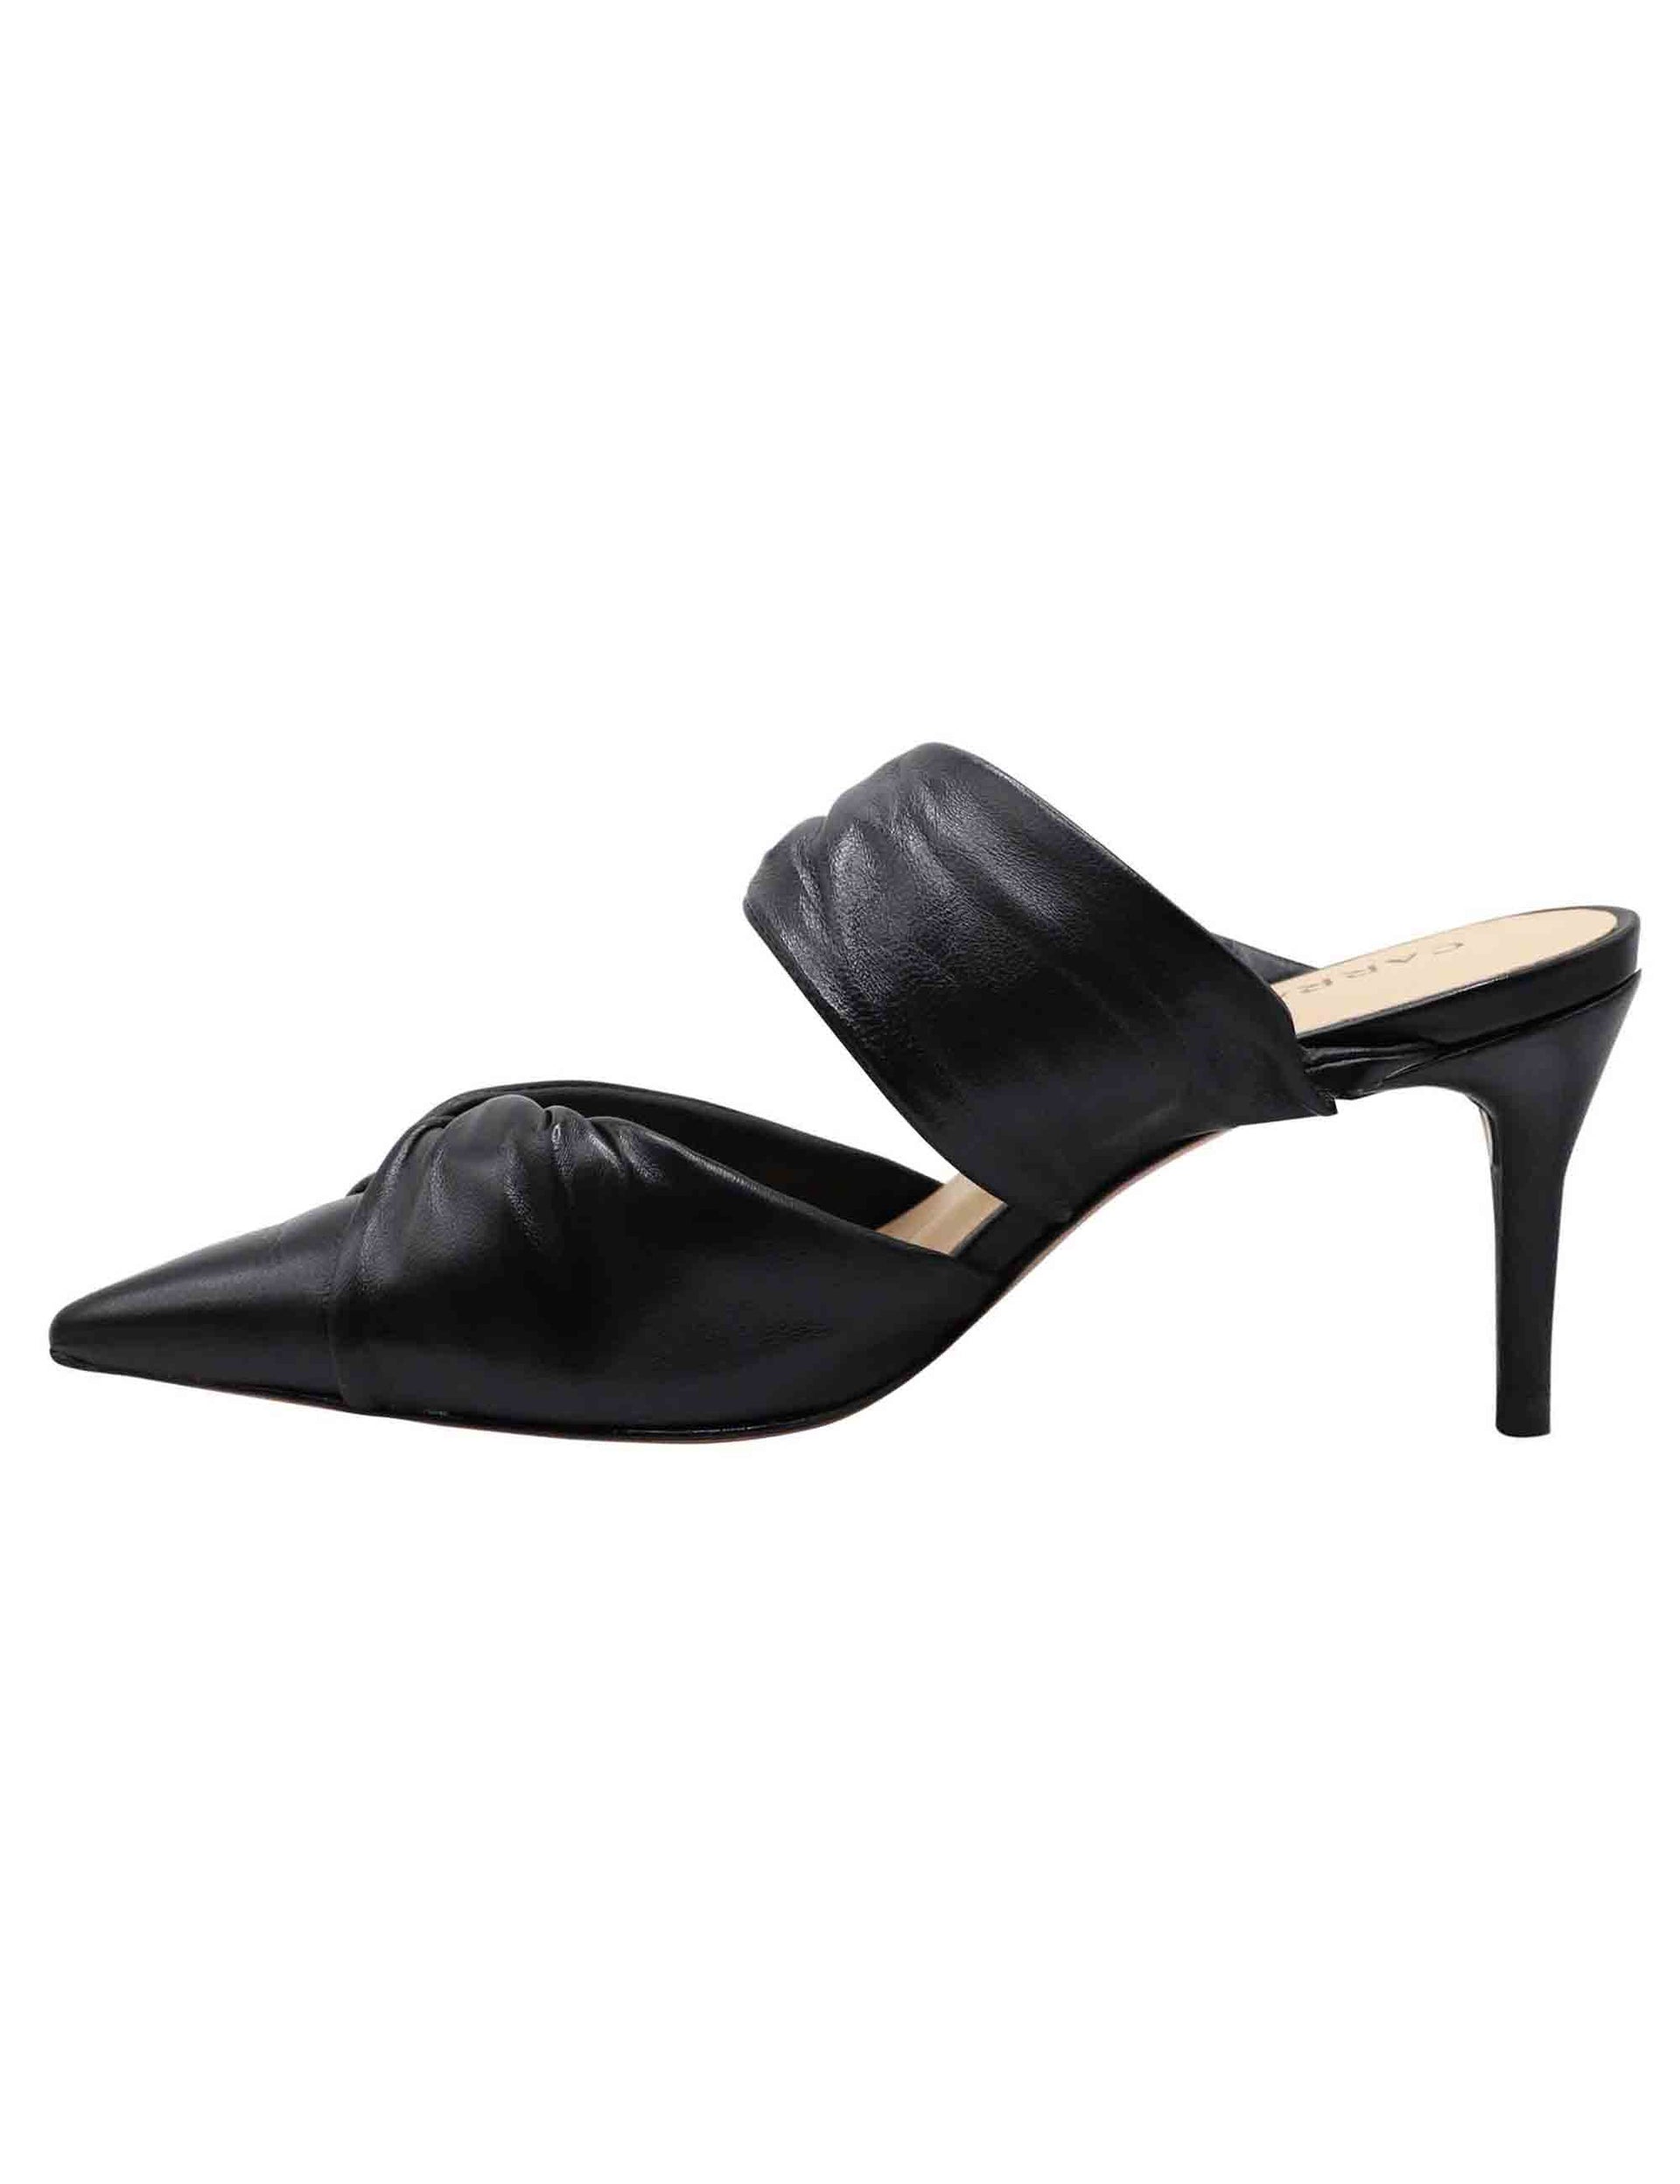 Women's black leather sabot with band on the instep and pointed toe